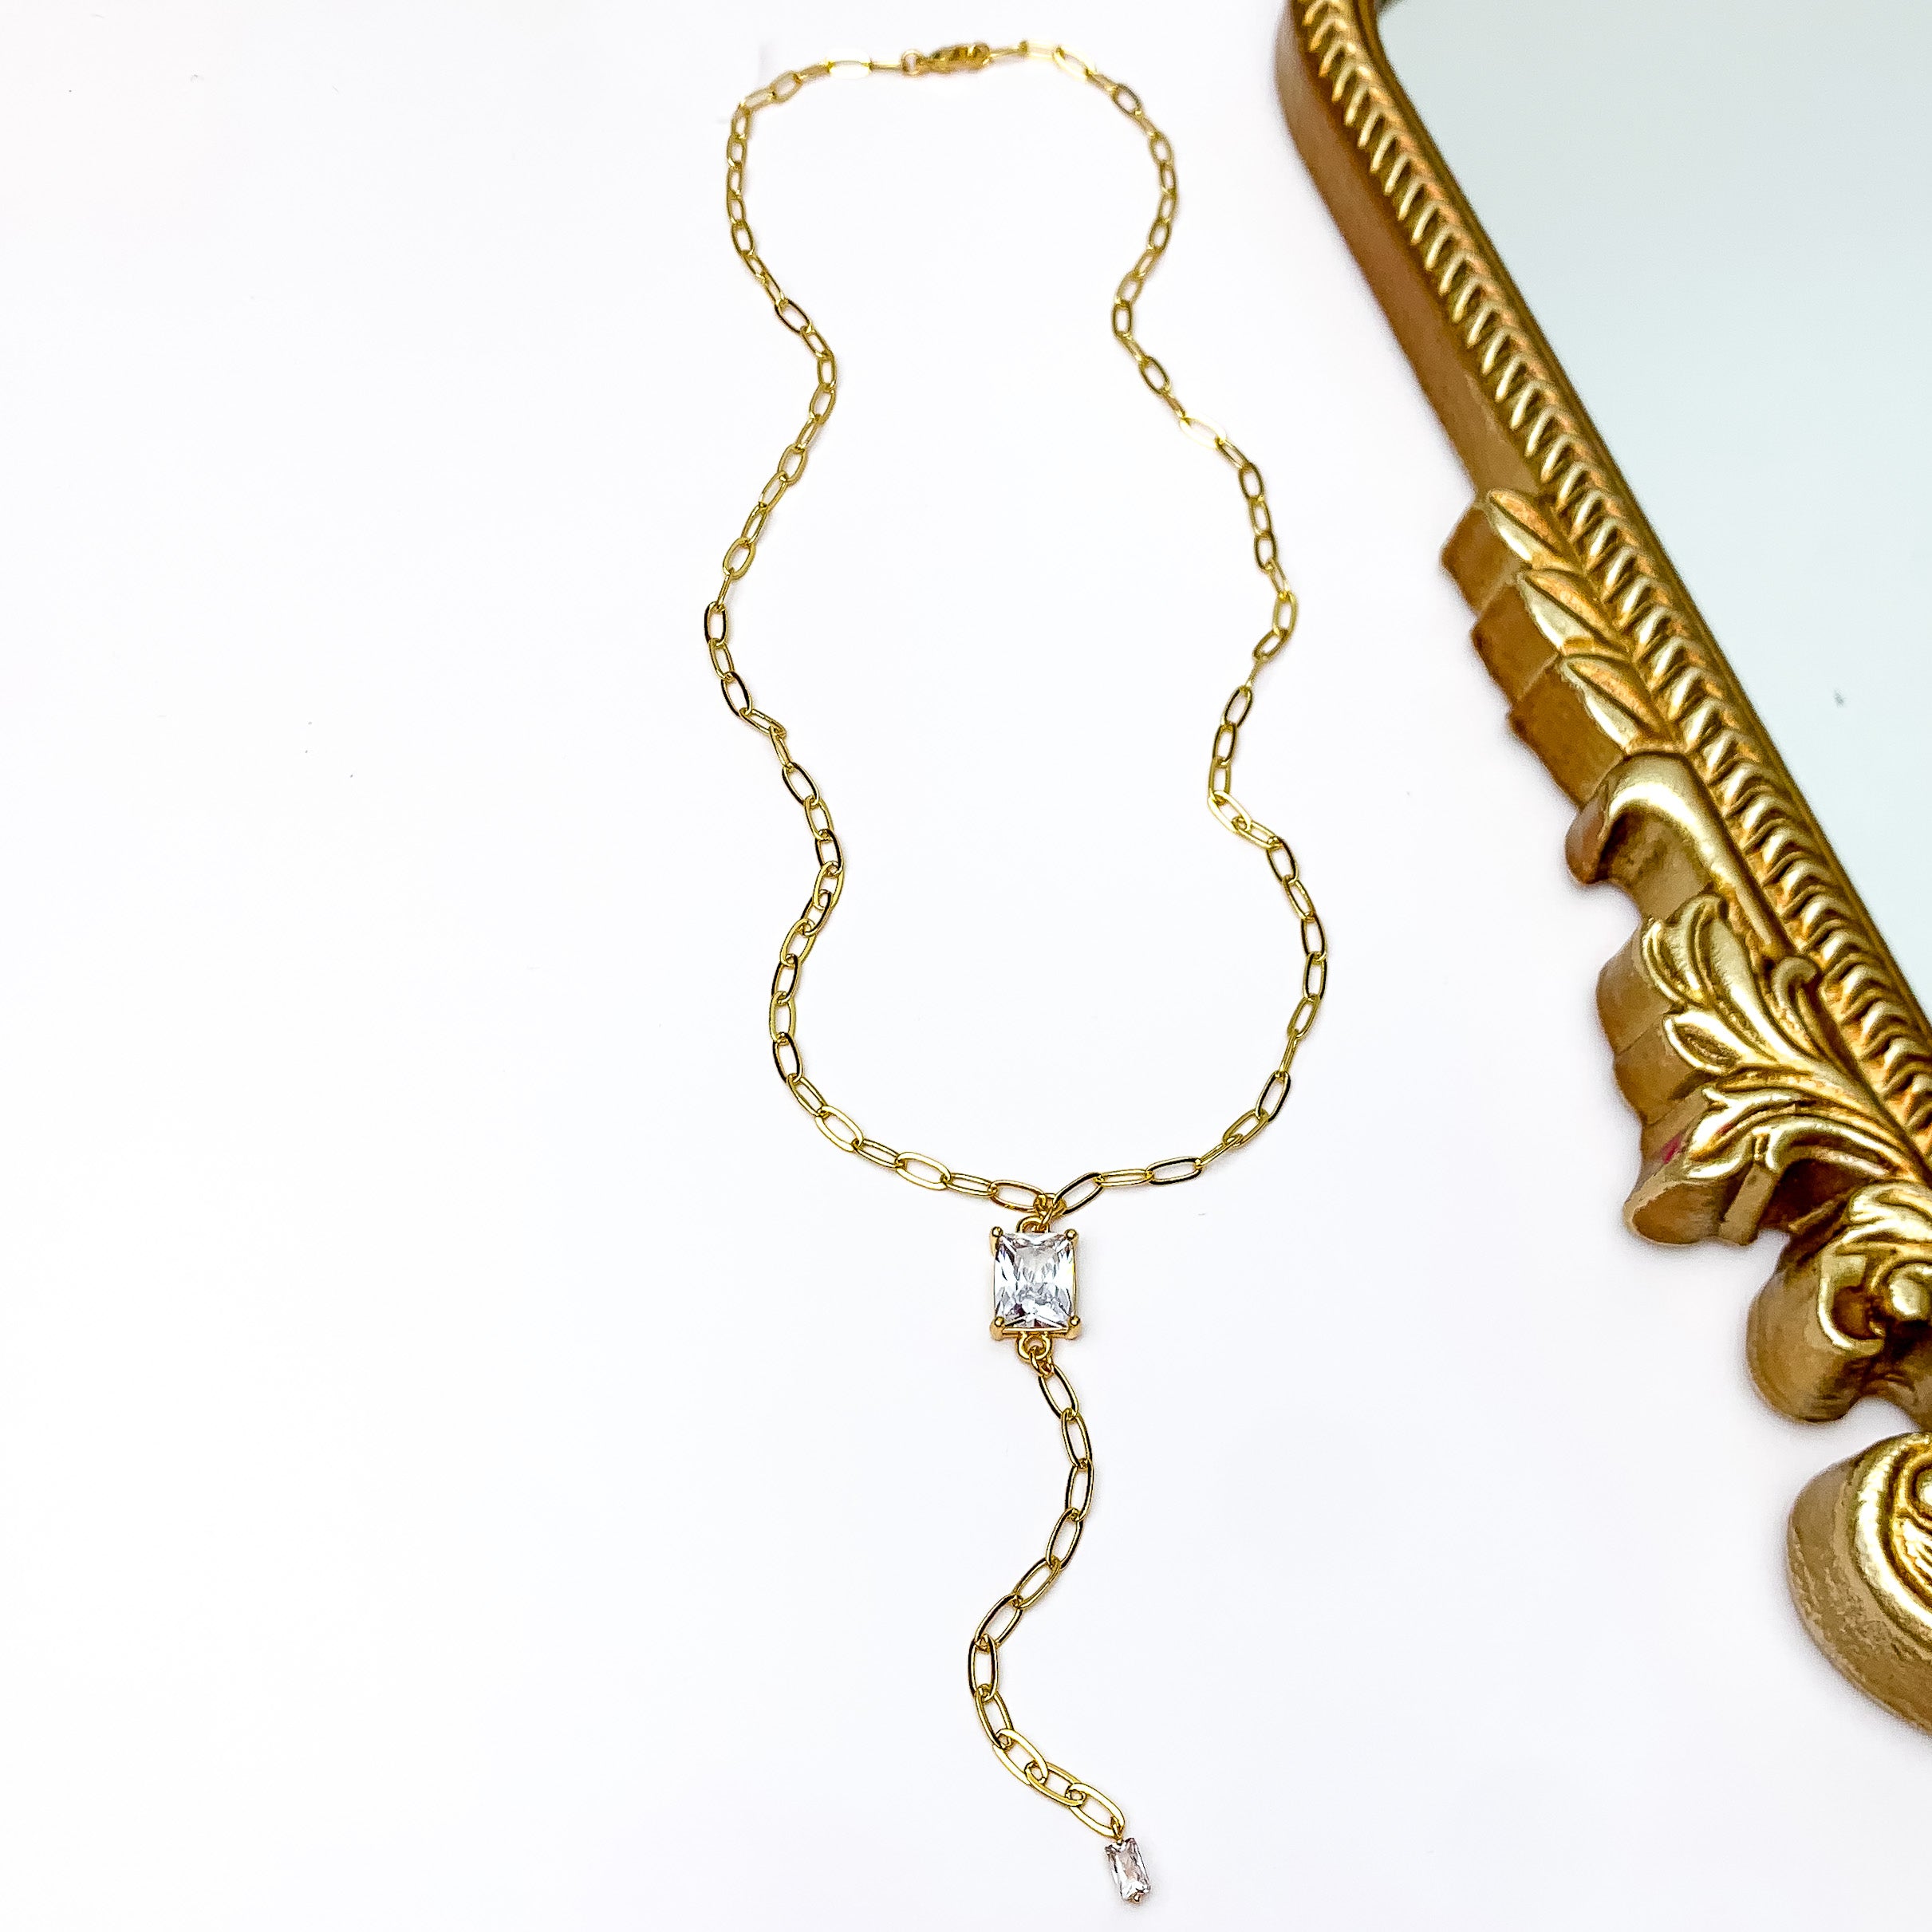 Kinsey Designs | Yara Lariat Necklace with CZ Crystal Pendants - Giddy Up Glamour Boutique